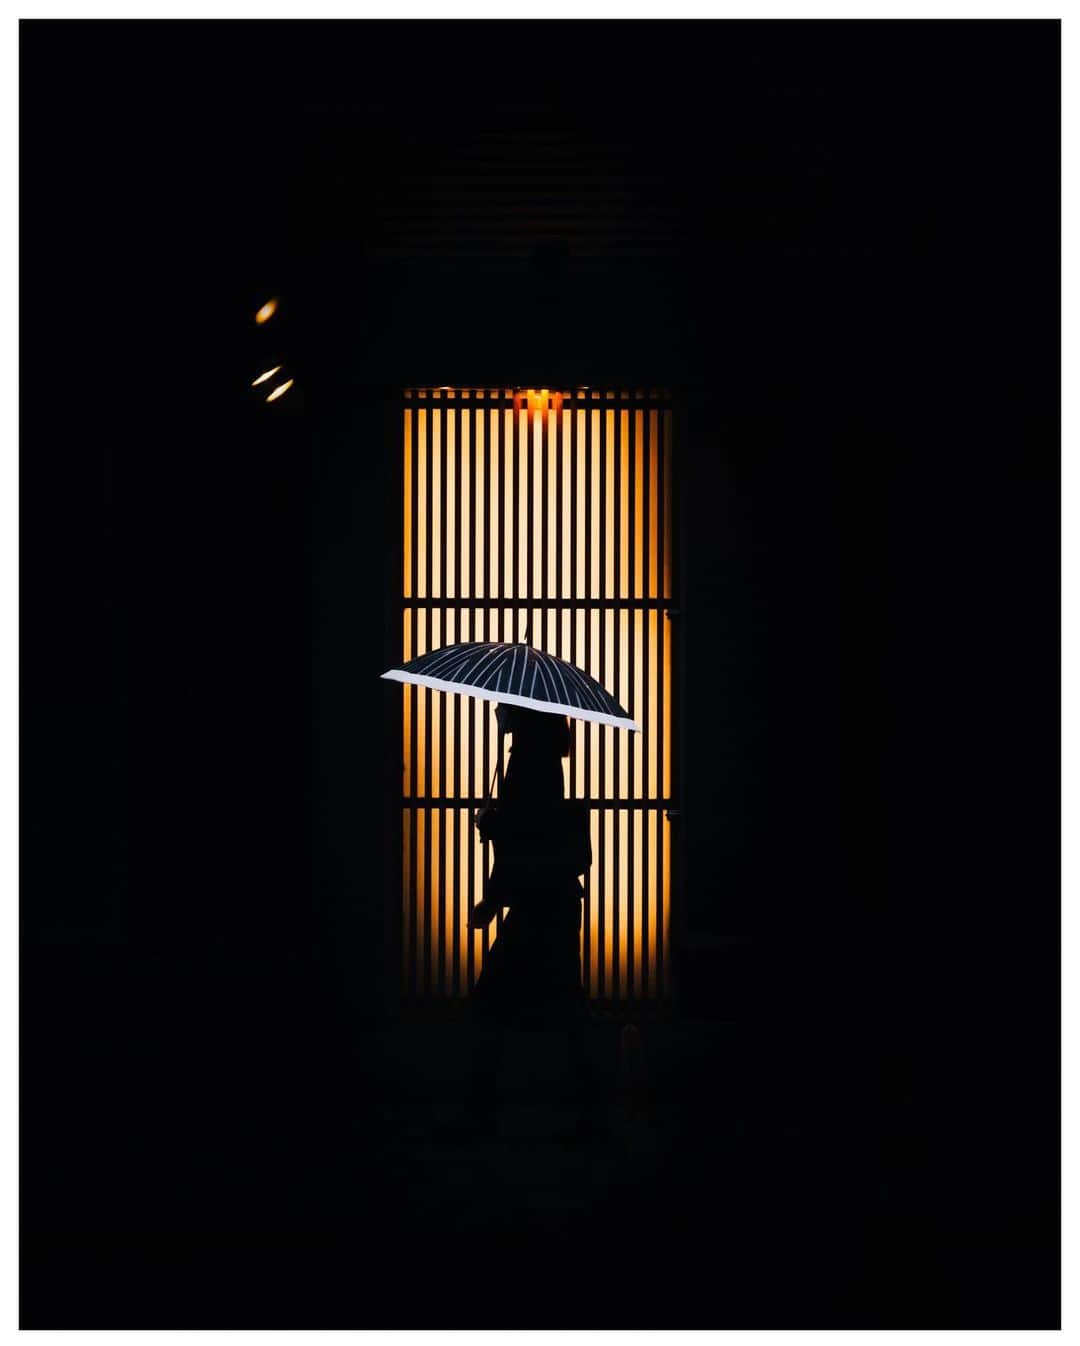 Takashi Yasuiのインスタグラム：「Tokyo 🟧 March 2023  📕My photo book - worldwide shipping daily - 🖥 Lightroom presets ▶▶Link in bio  #USETSU #USETSUpresets #TakashiYasui #SPiCollective #filmic_streets #ASPfeatures #photocinematica #STREETGRAMMERS #street_storytelling #bcncollective #ifyouleave #sublimestreet #streetfinder #timeless_streets #MadeWithLightroom #worldviewmag #hellofrom #reco_ig」